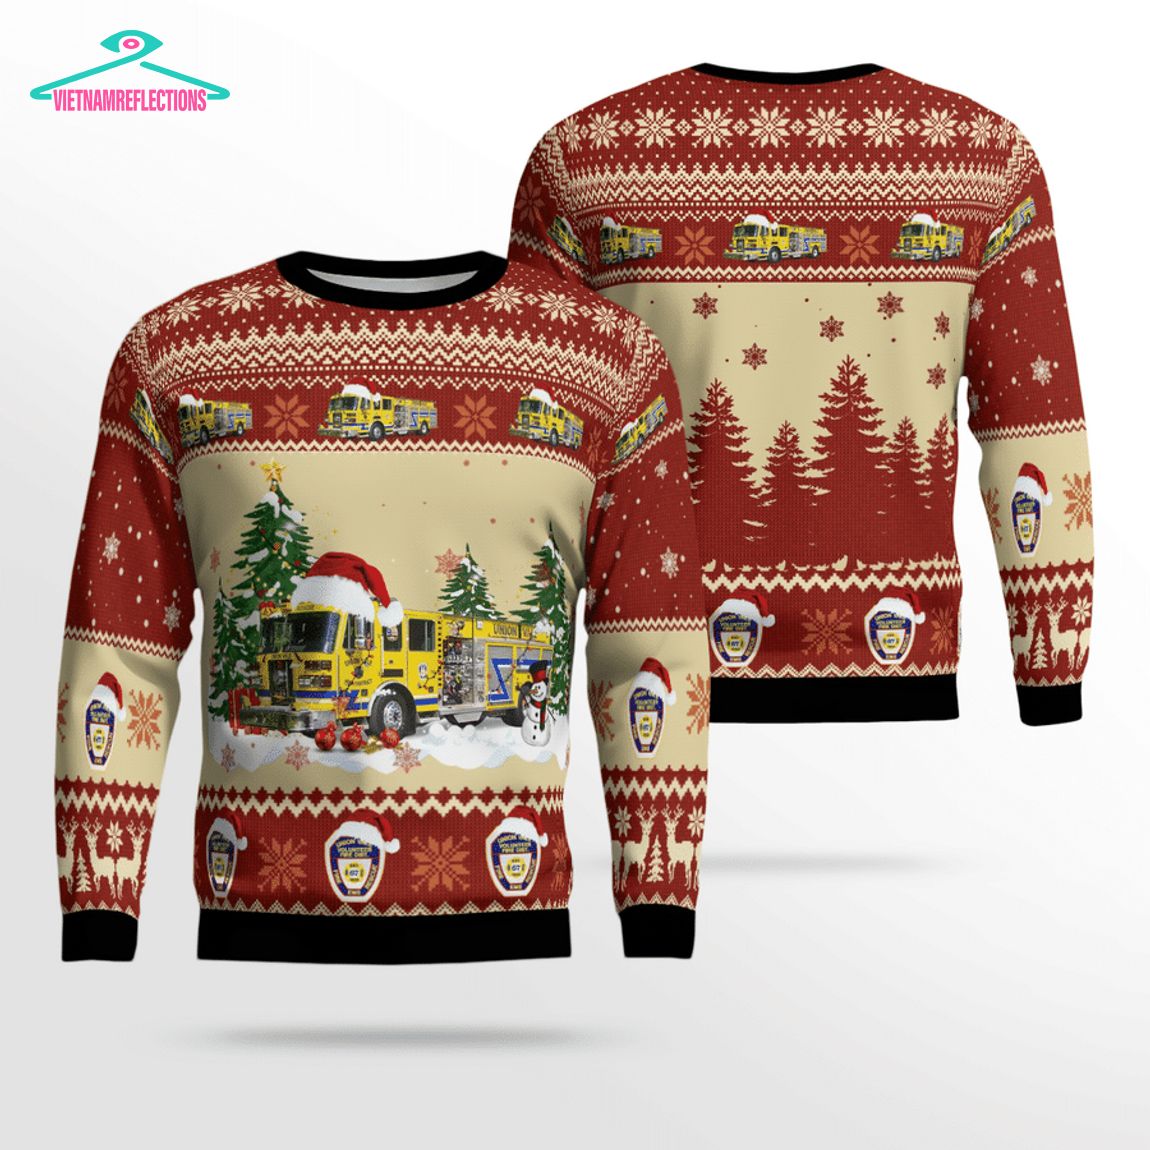 New York Union Vale Fire District 3D Christmas Sweater - Rocking picture